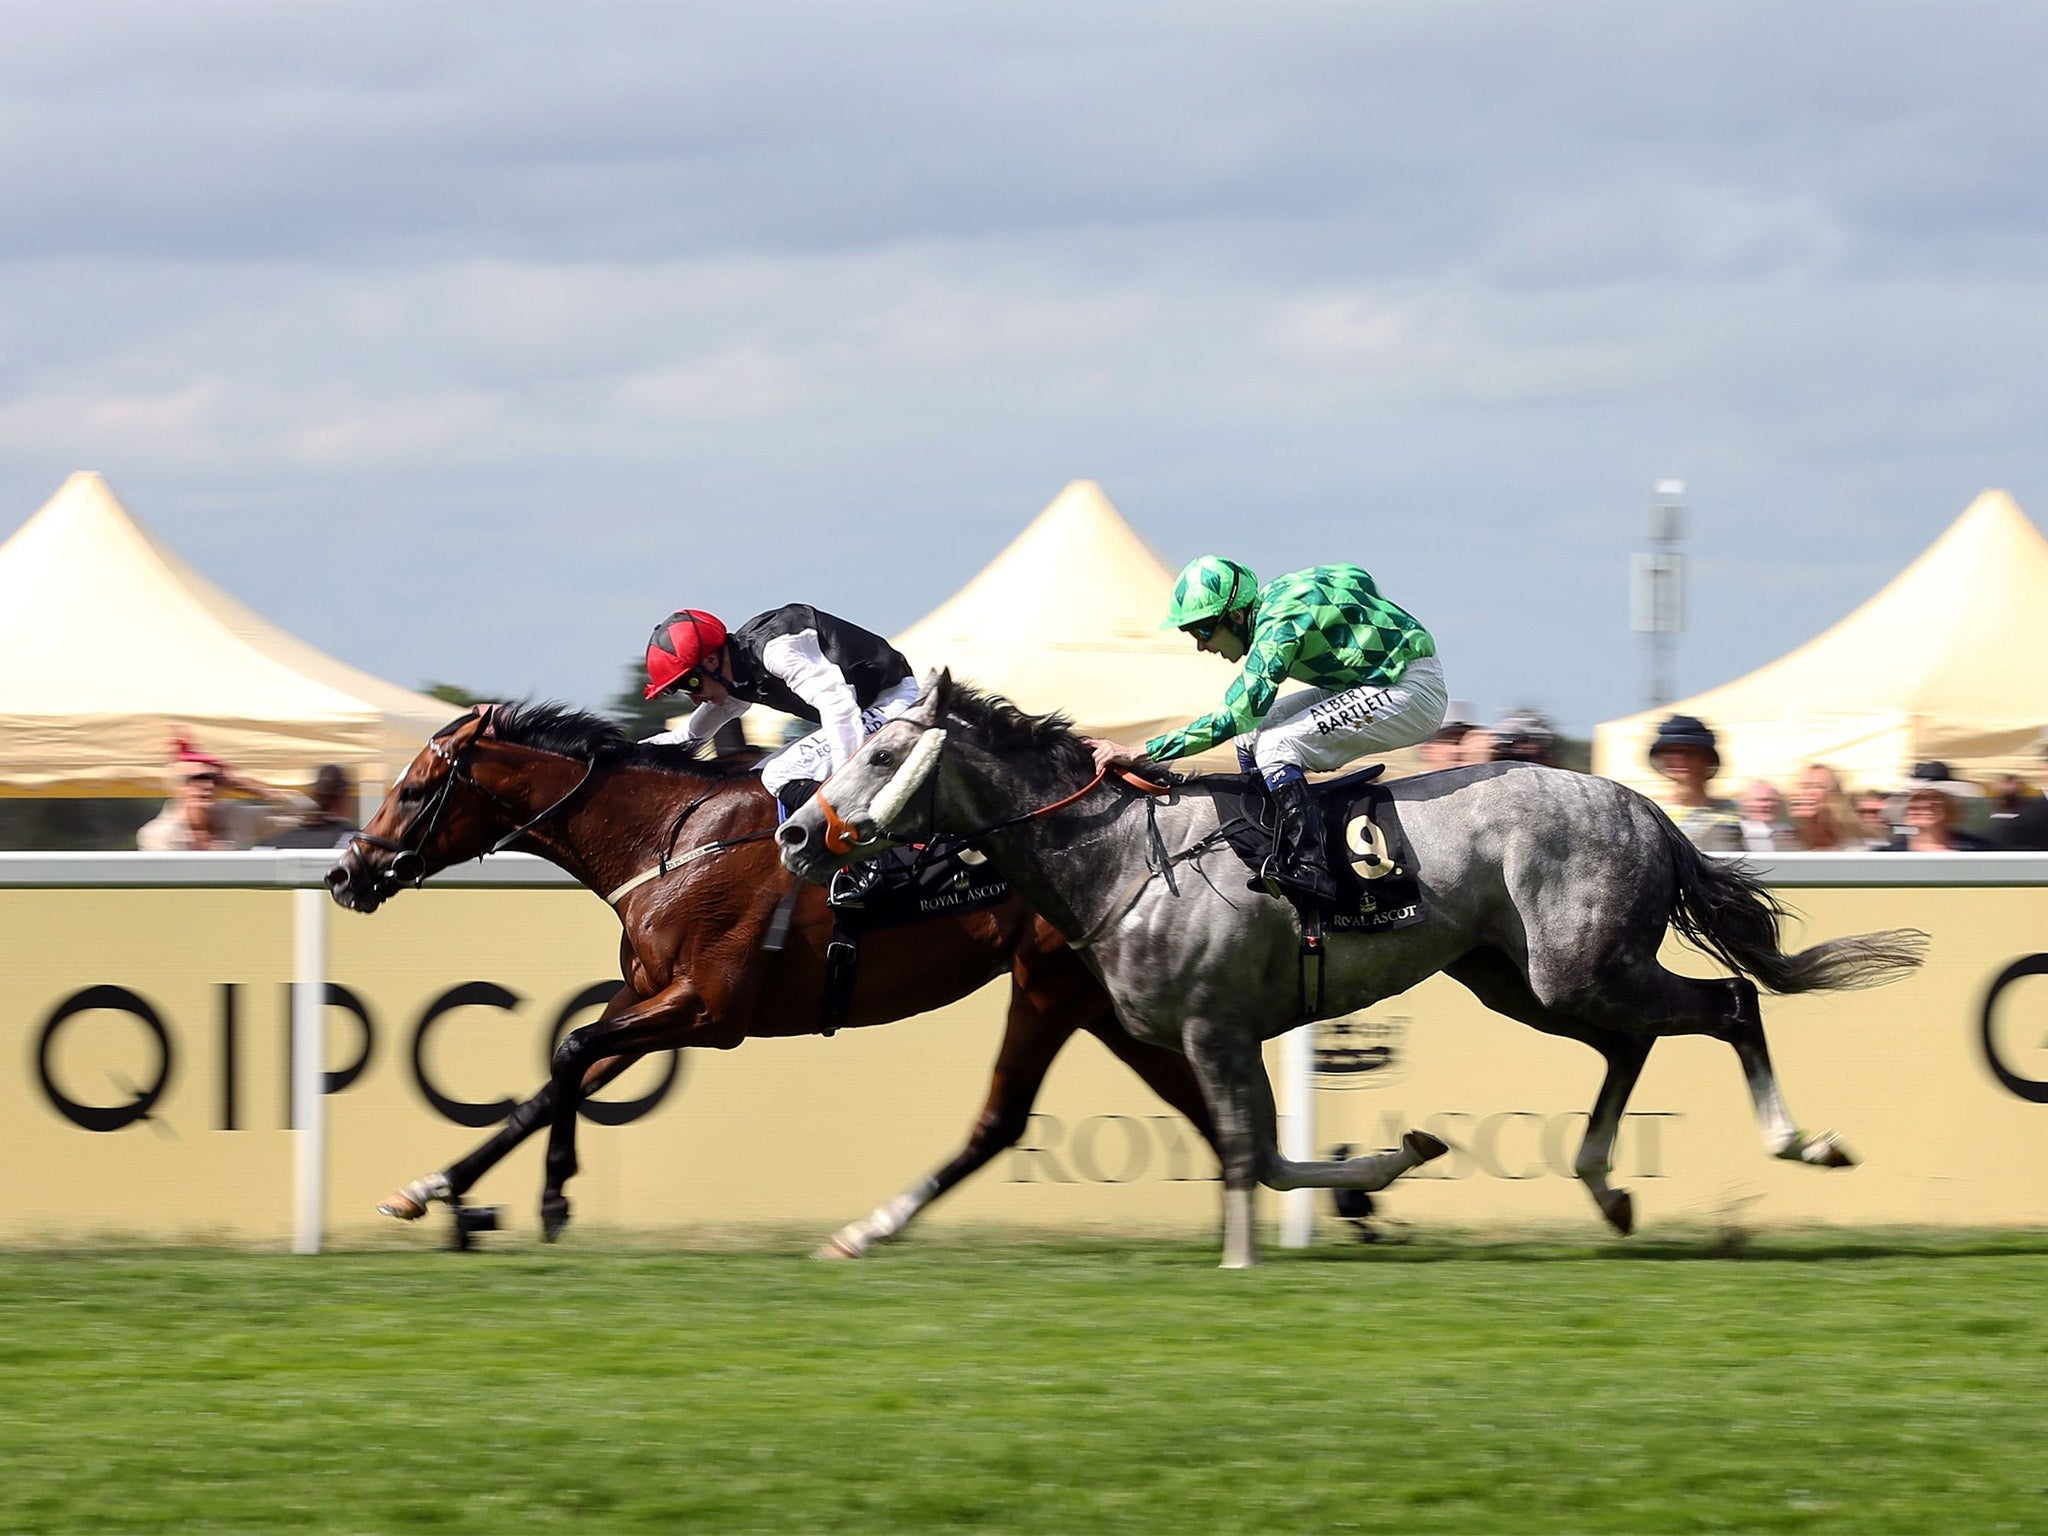 Free Eagle beats The Grey Gatsby by a short head in the Prince of Wales’s Stakes